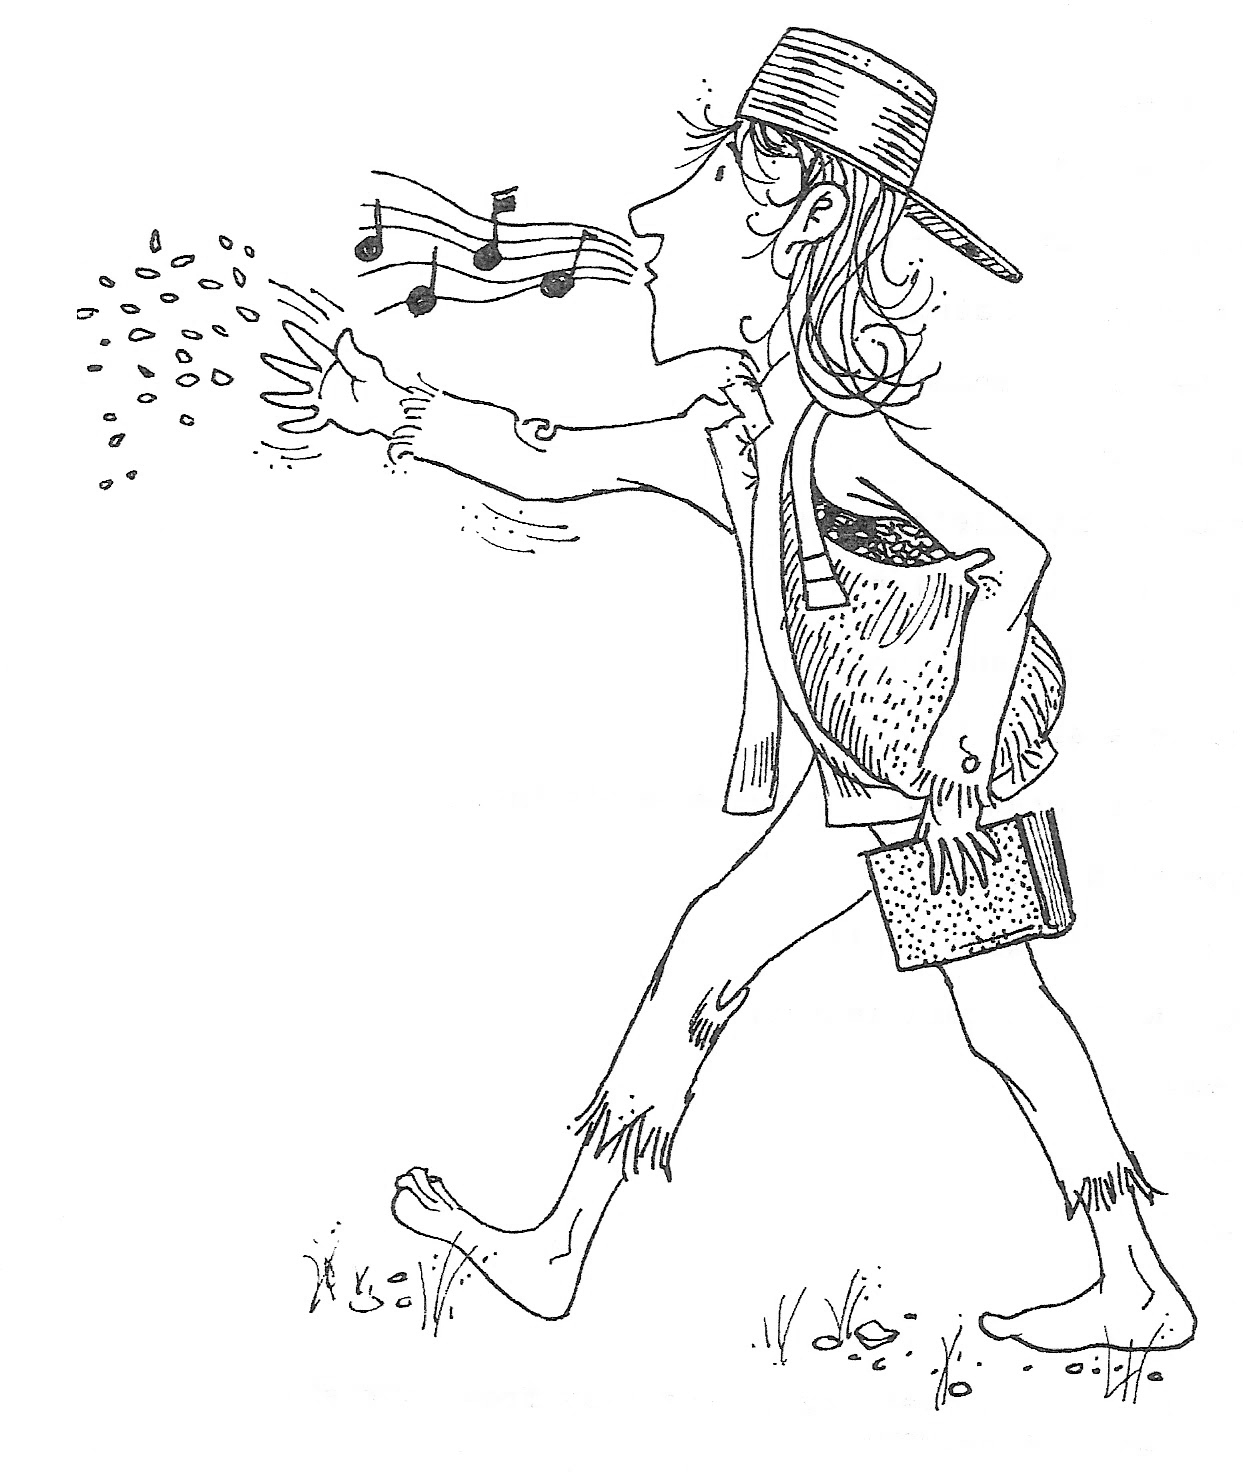 johnny-appleseed-coloring-pages-best-coloring-pages-for-kids